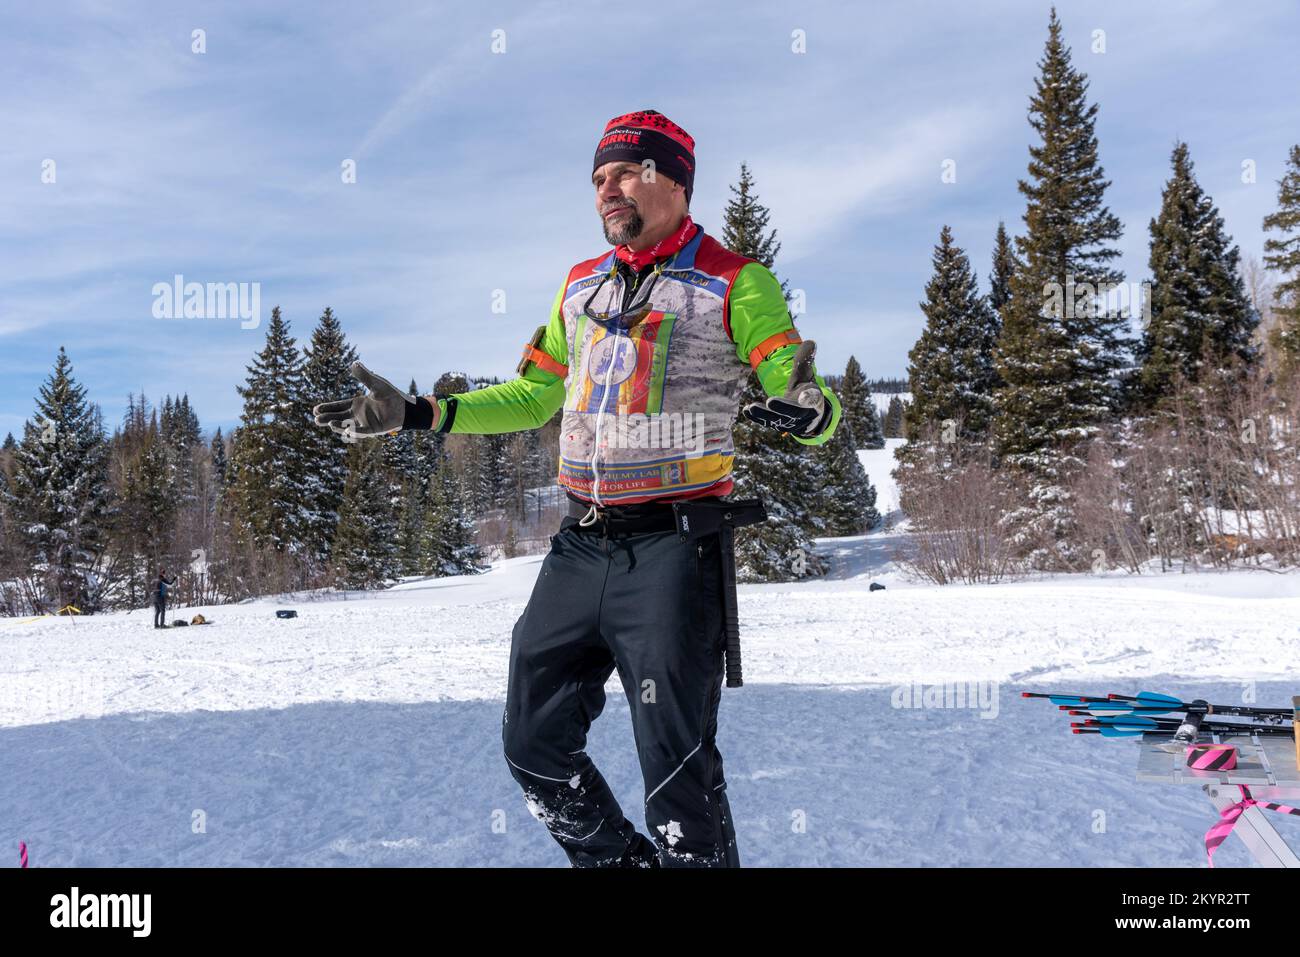 Happy middle aged man in insulated ski wear, arms lifted, walking in snow during Chama Chile Ski Classic in San Juan Mountains near Chama, New Mexico. Stock Photo